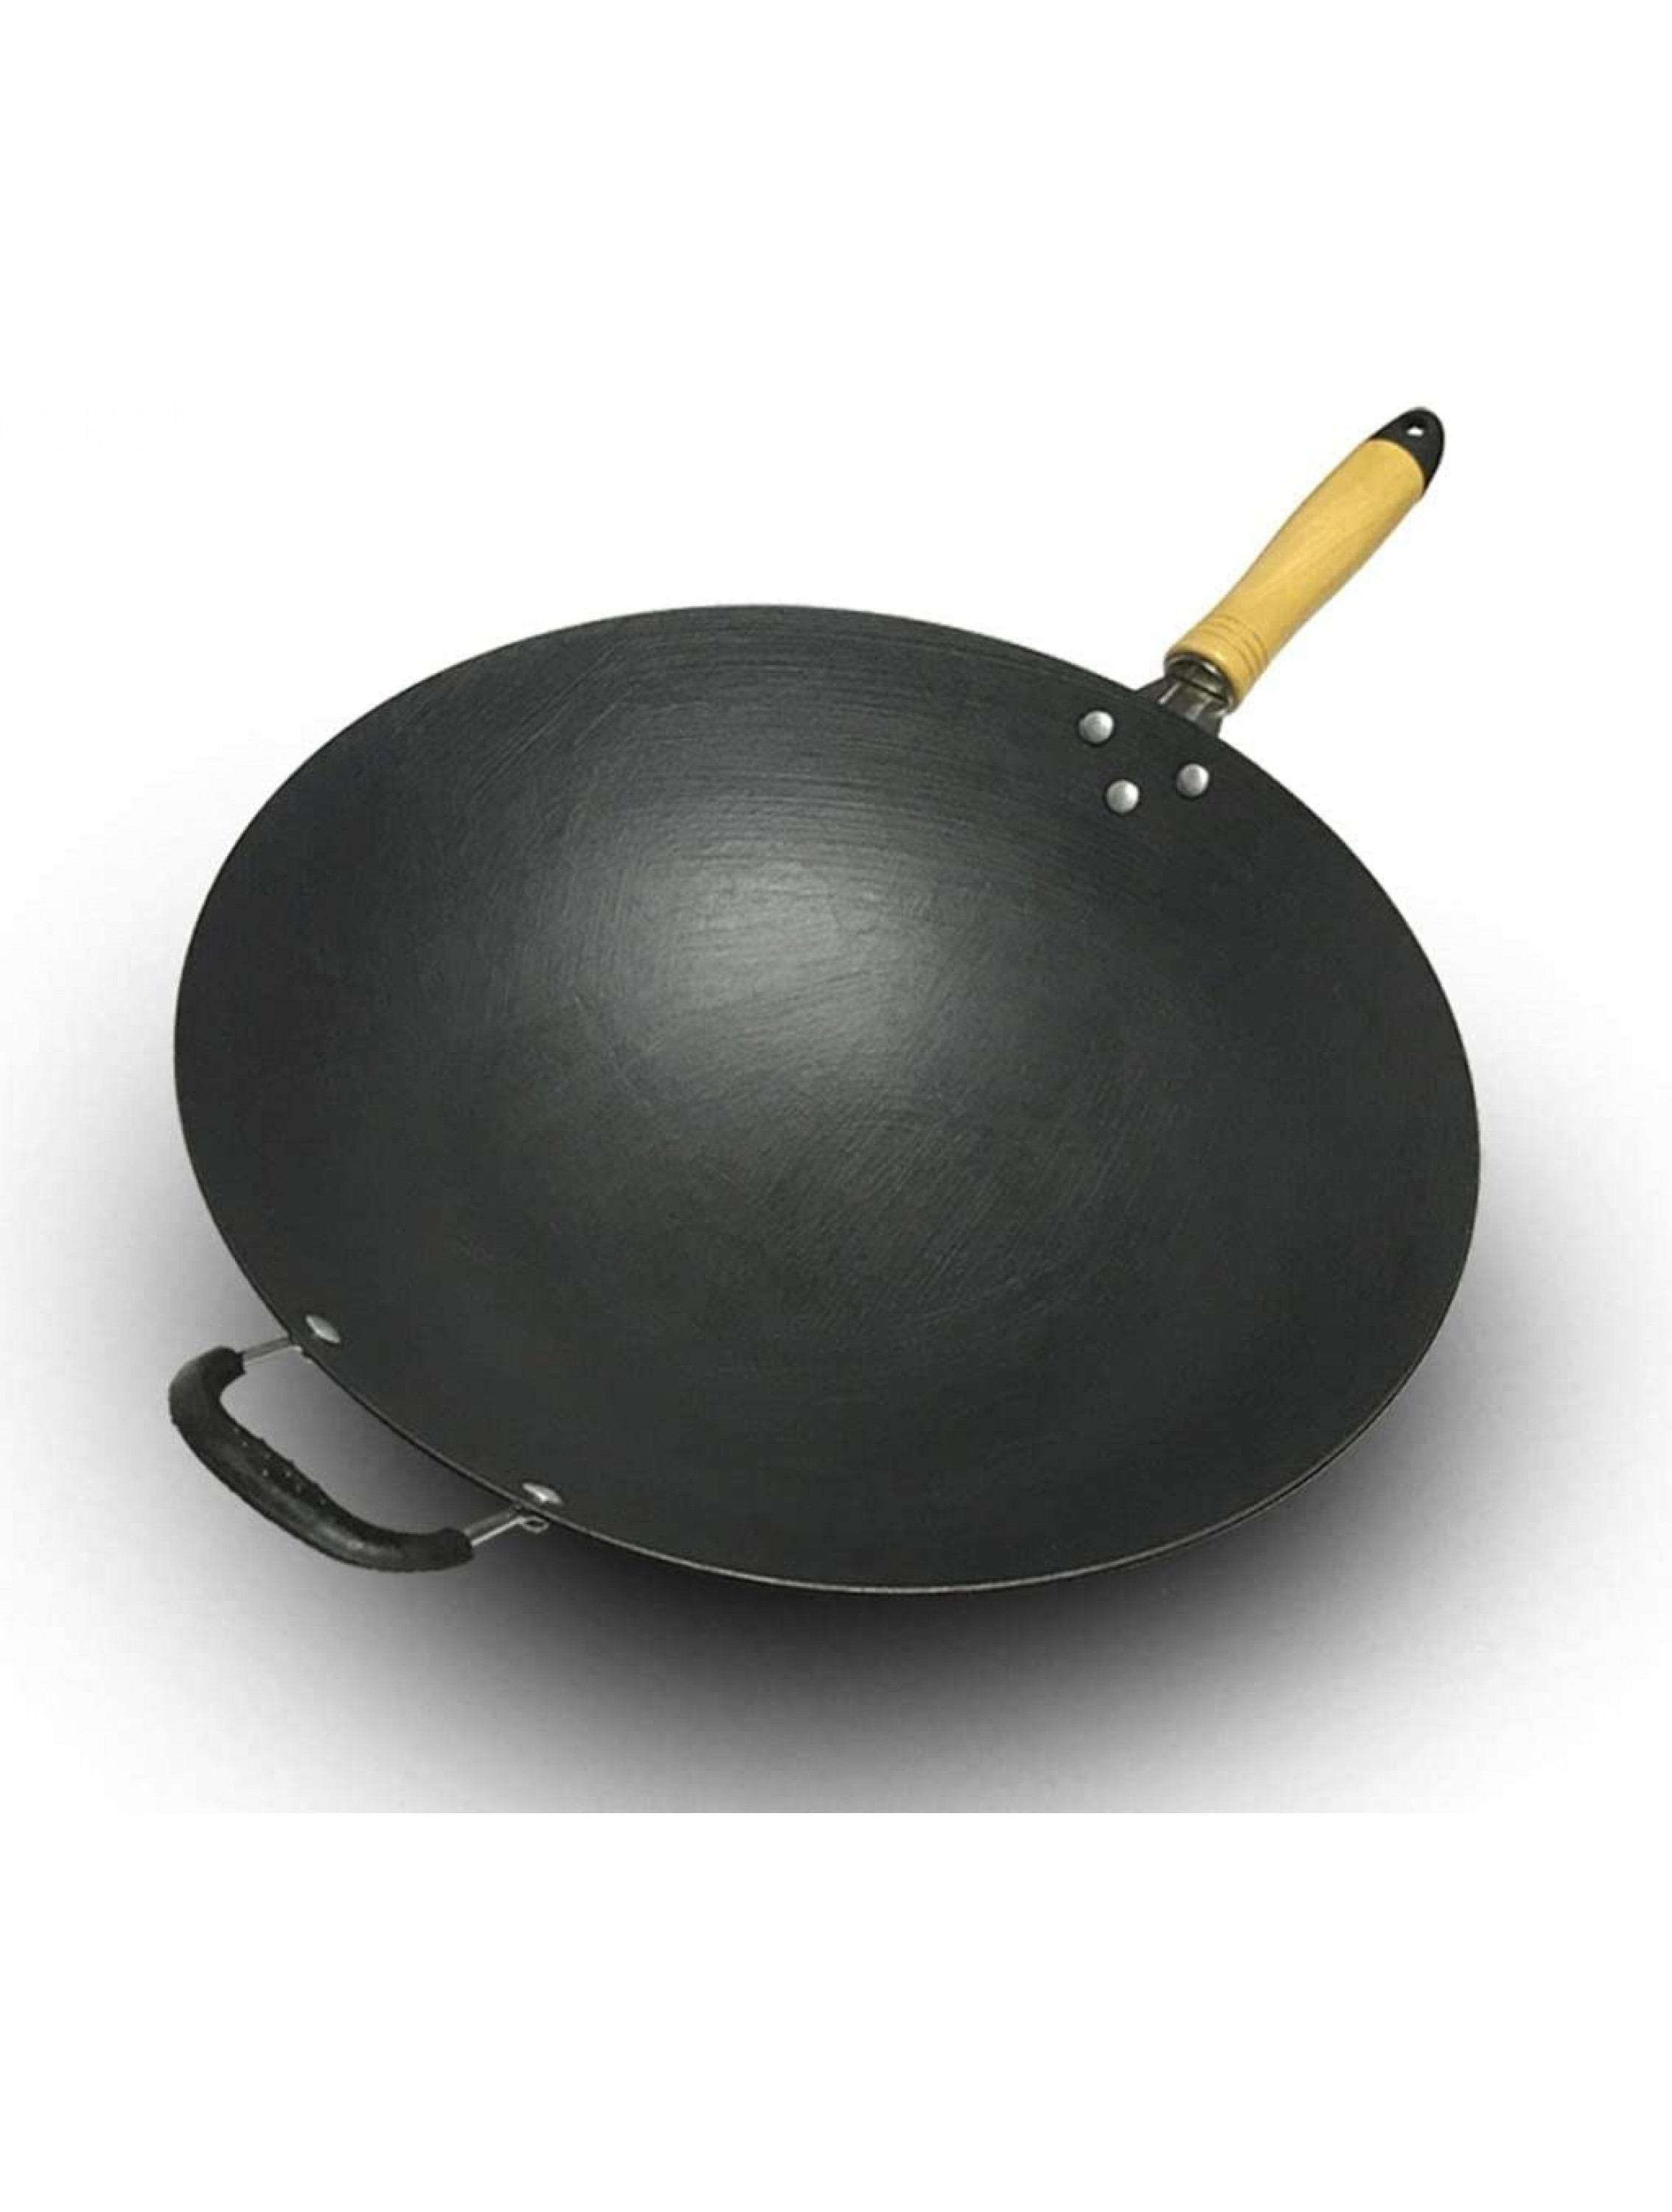 GHBNK Cast Iron Wok Household Classic Uncoated Wok Cooking Pan Wok Pan Skillet Fry Pan Chef's Pans Size : 36cm - BBV5GJ48T